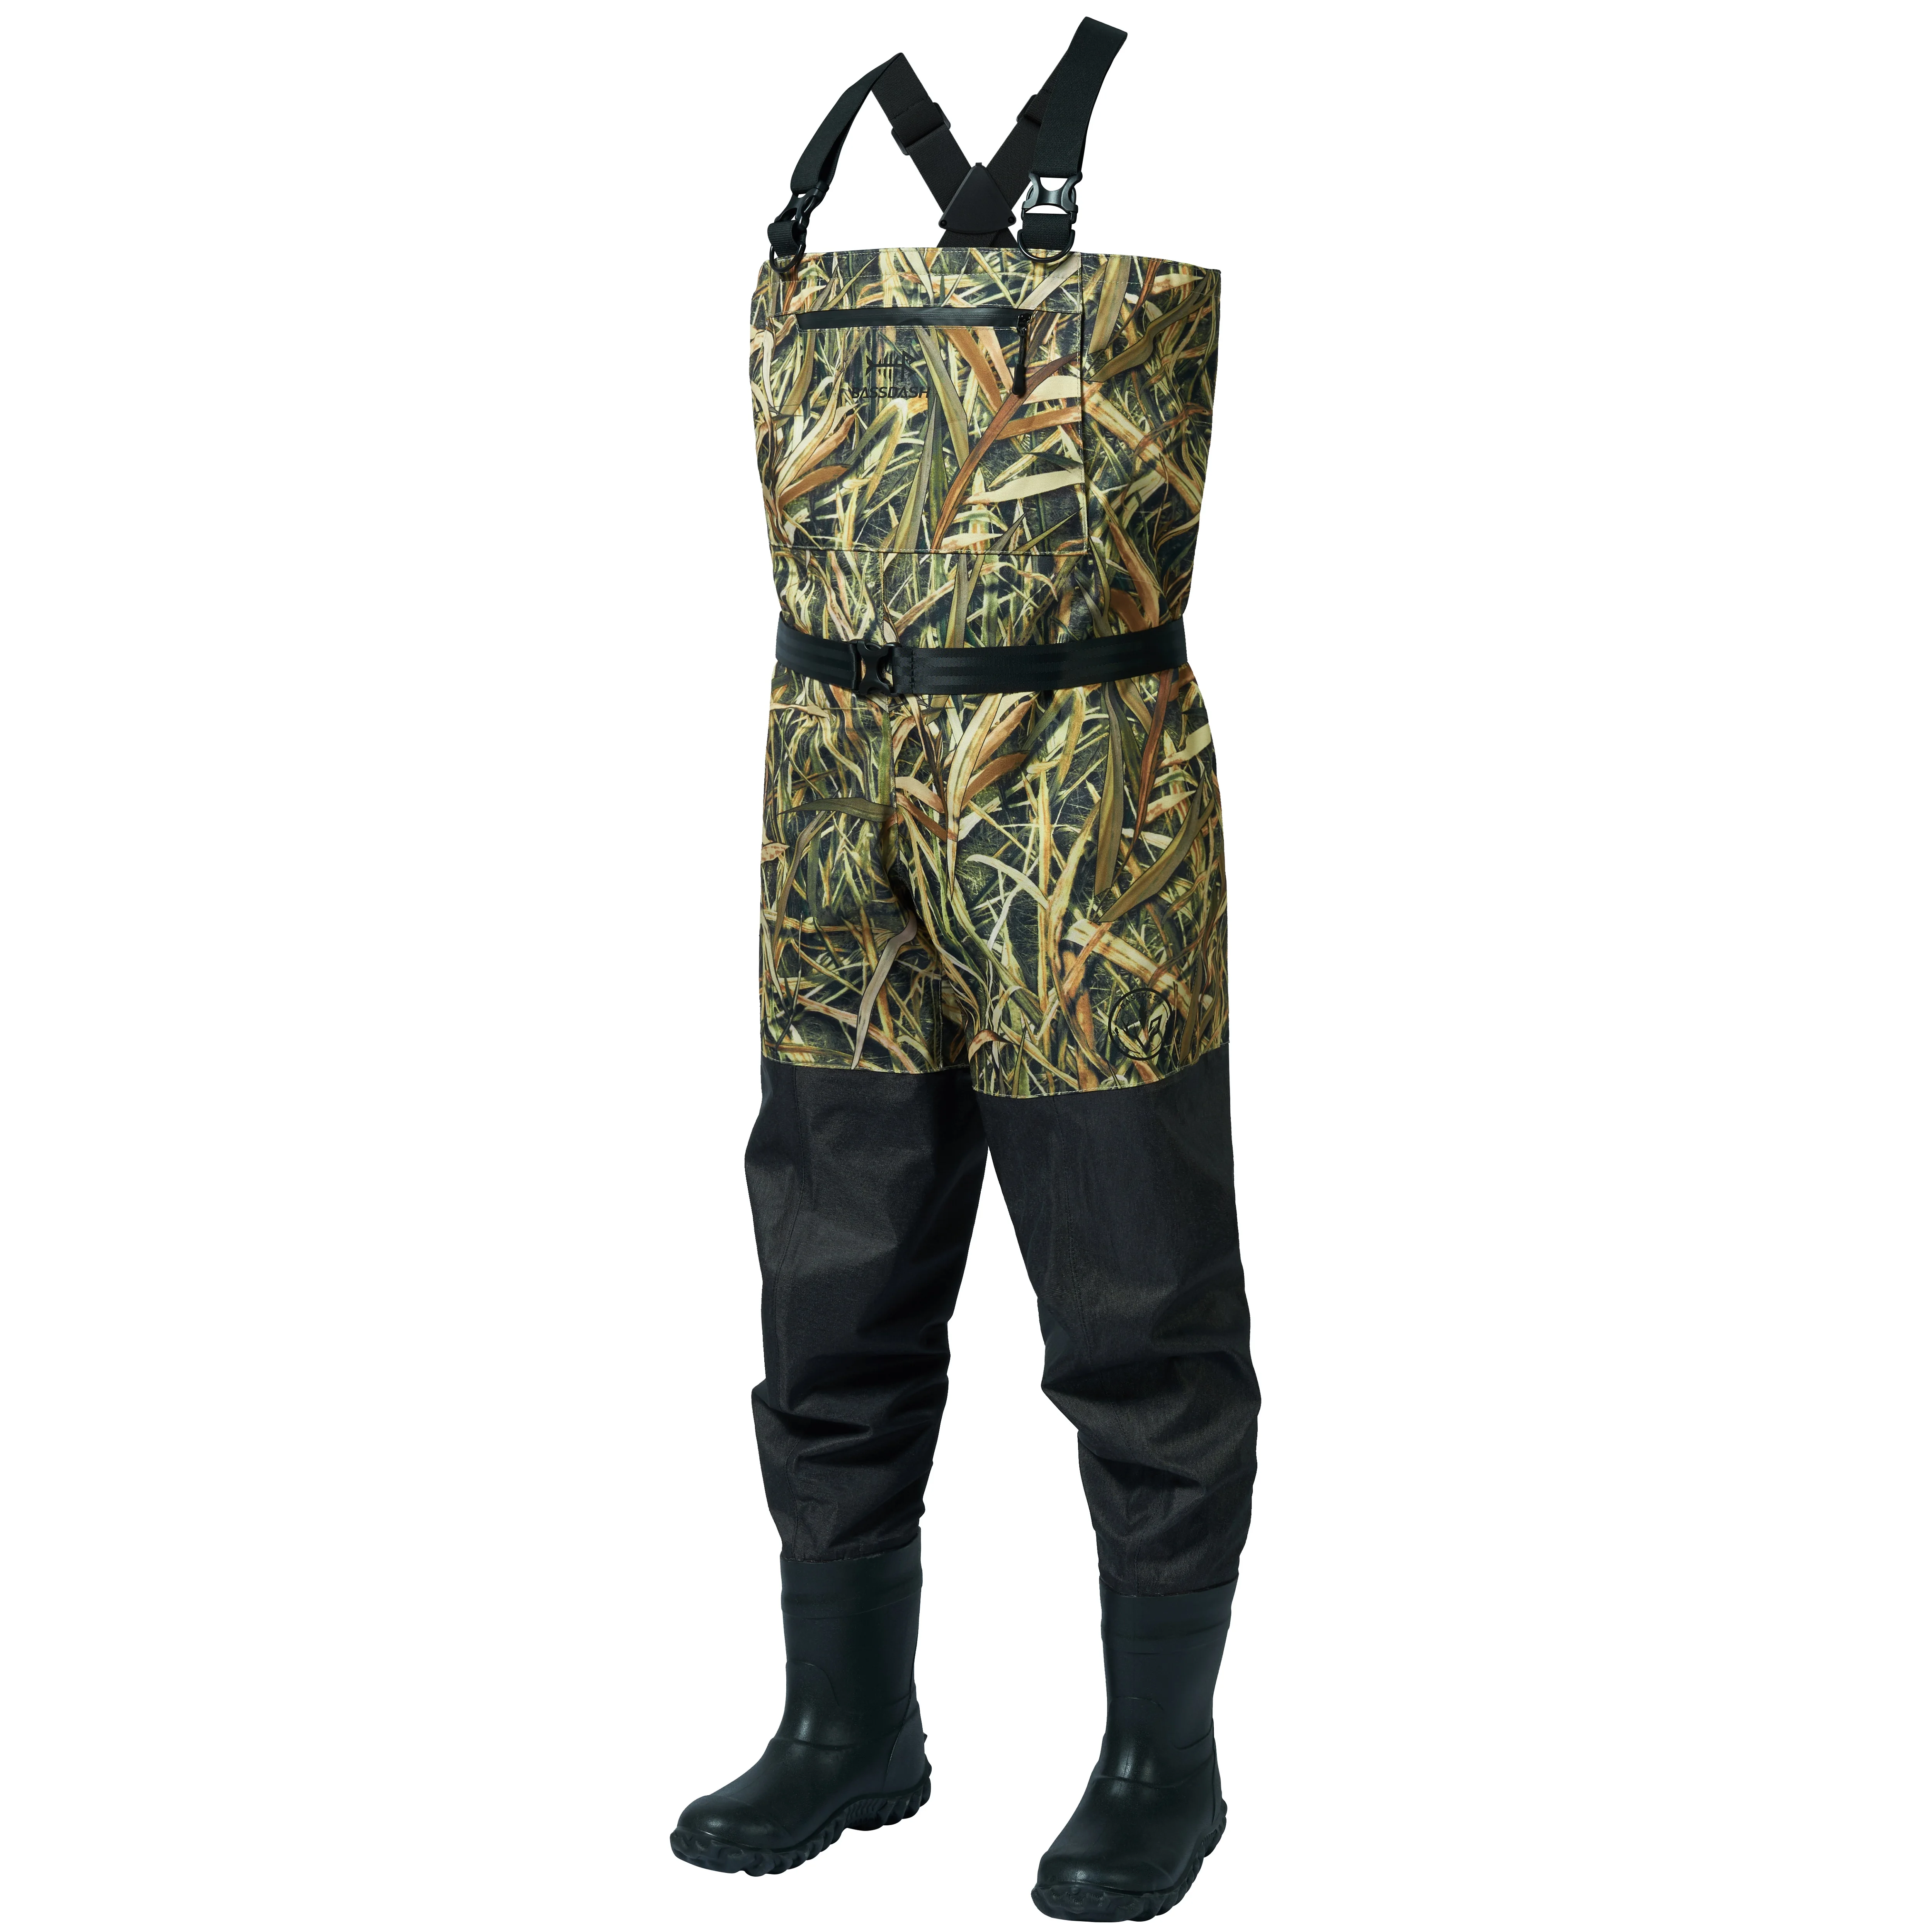 Bassdash IMMERSE Breathable Ripstop Boot Foot Fishing Hunting Waders Lightweight Grey Camo Chest Wader for Men Women